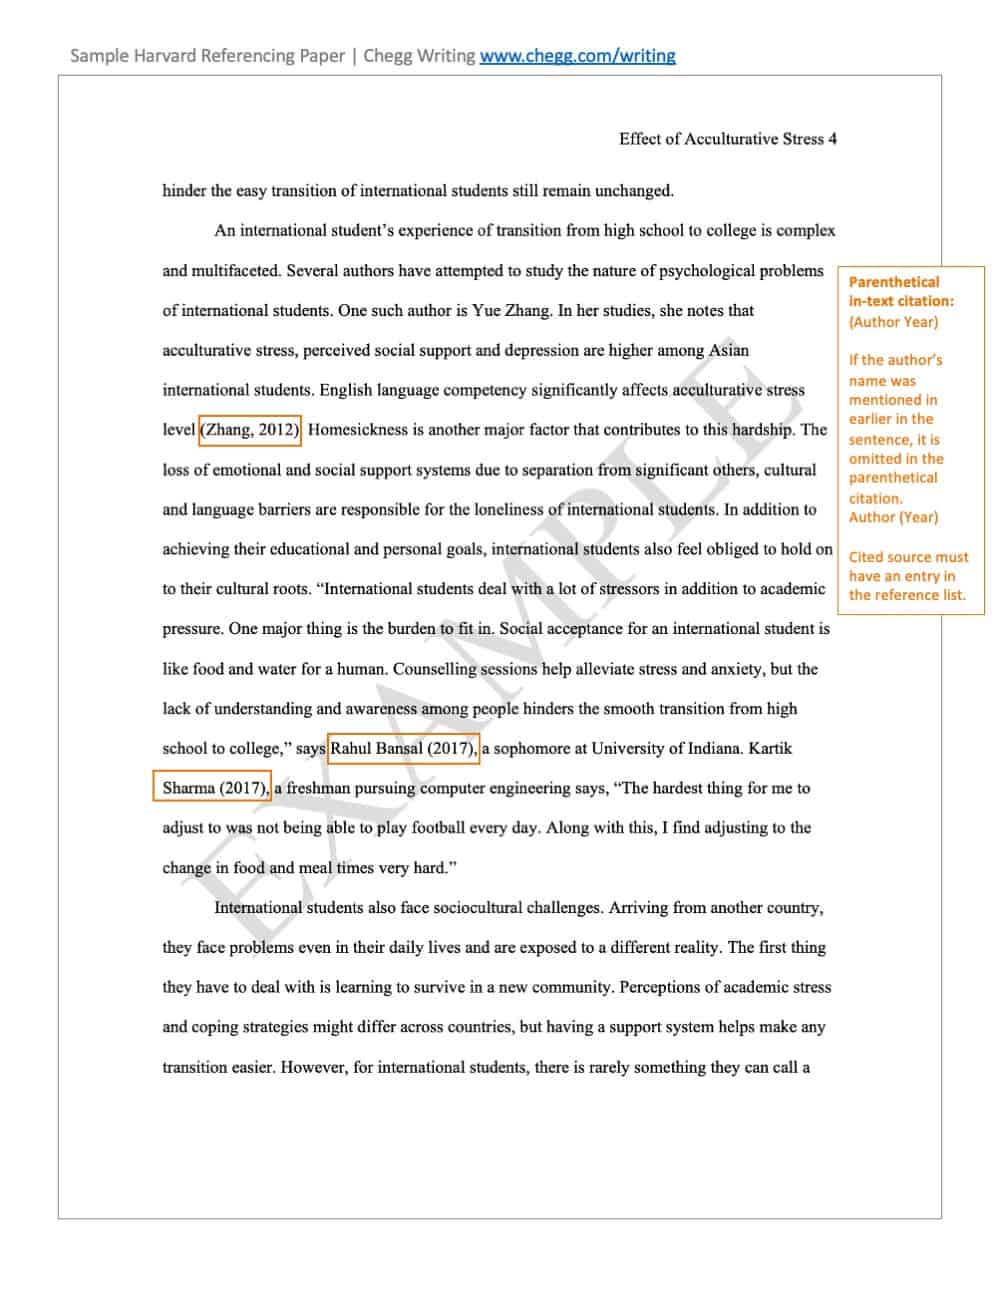 essay examples with harvard referencing